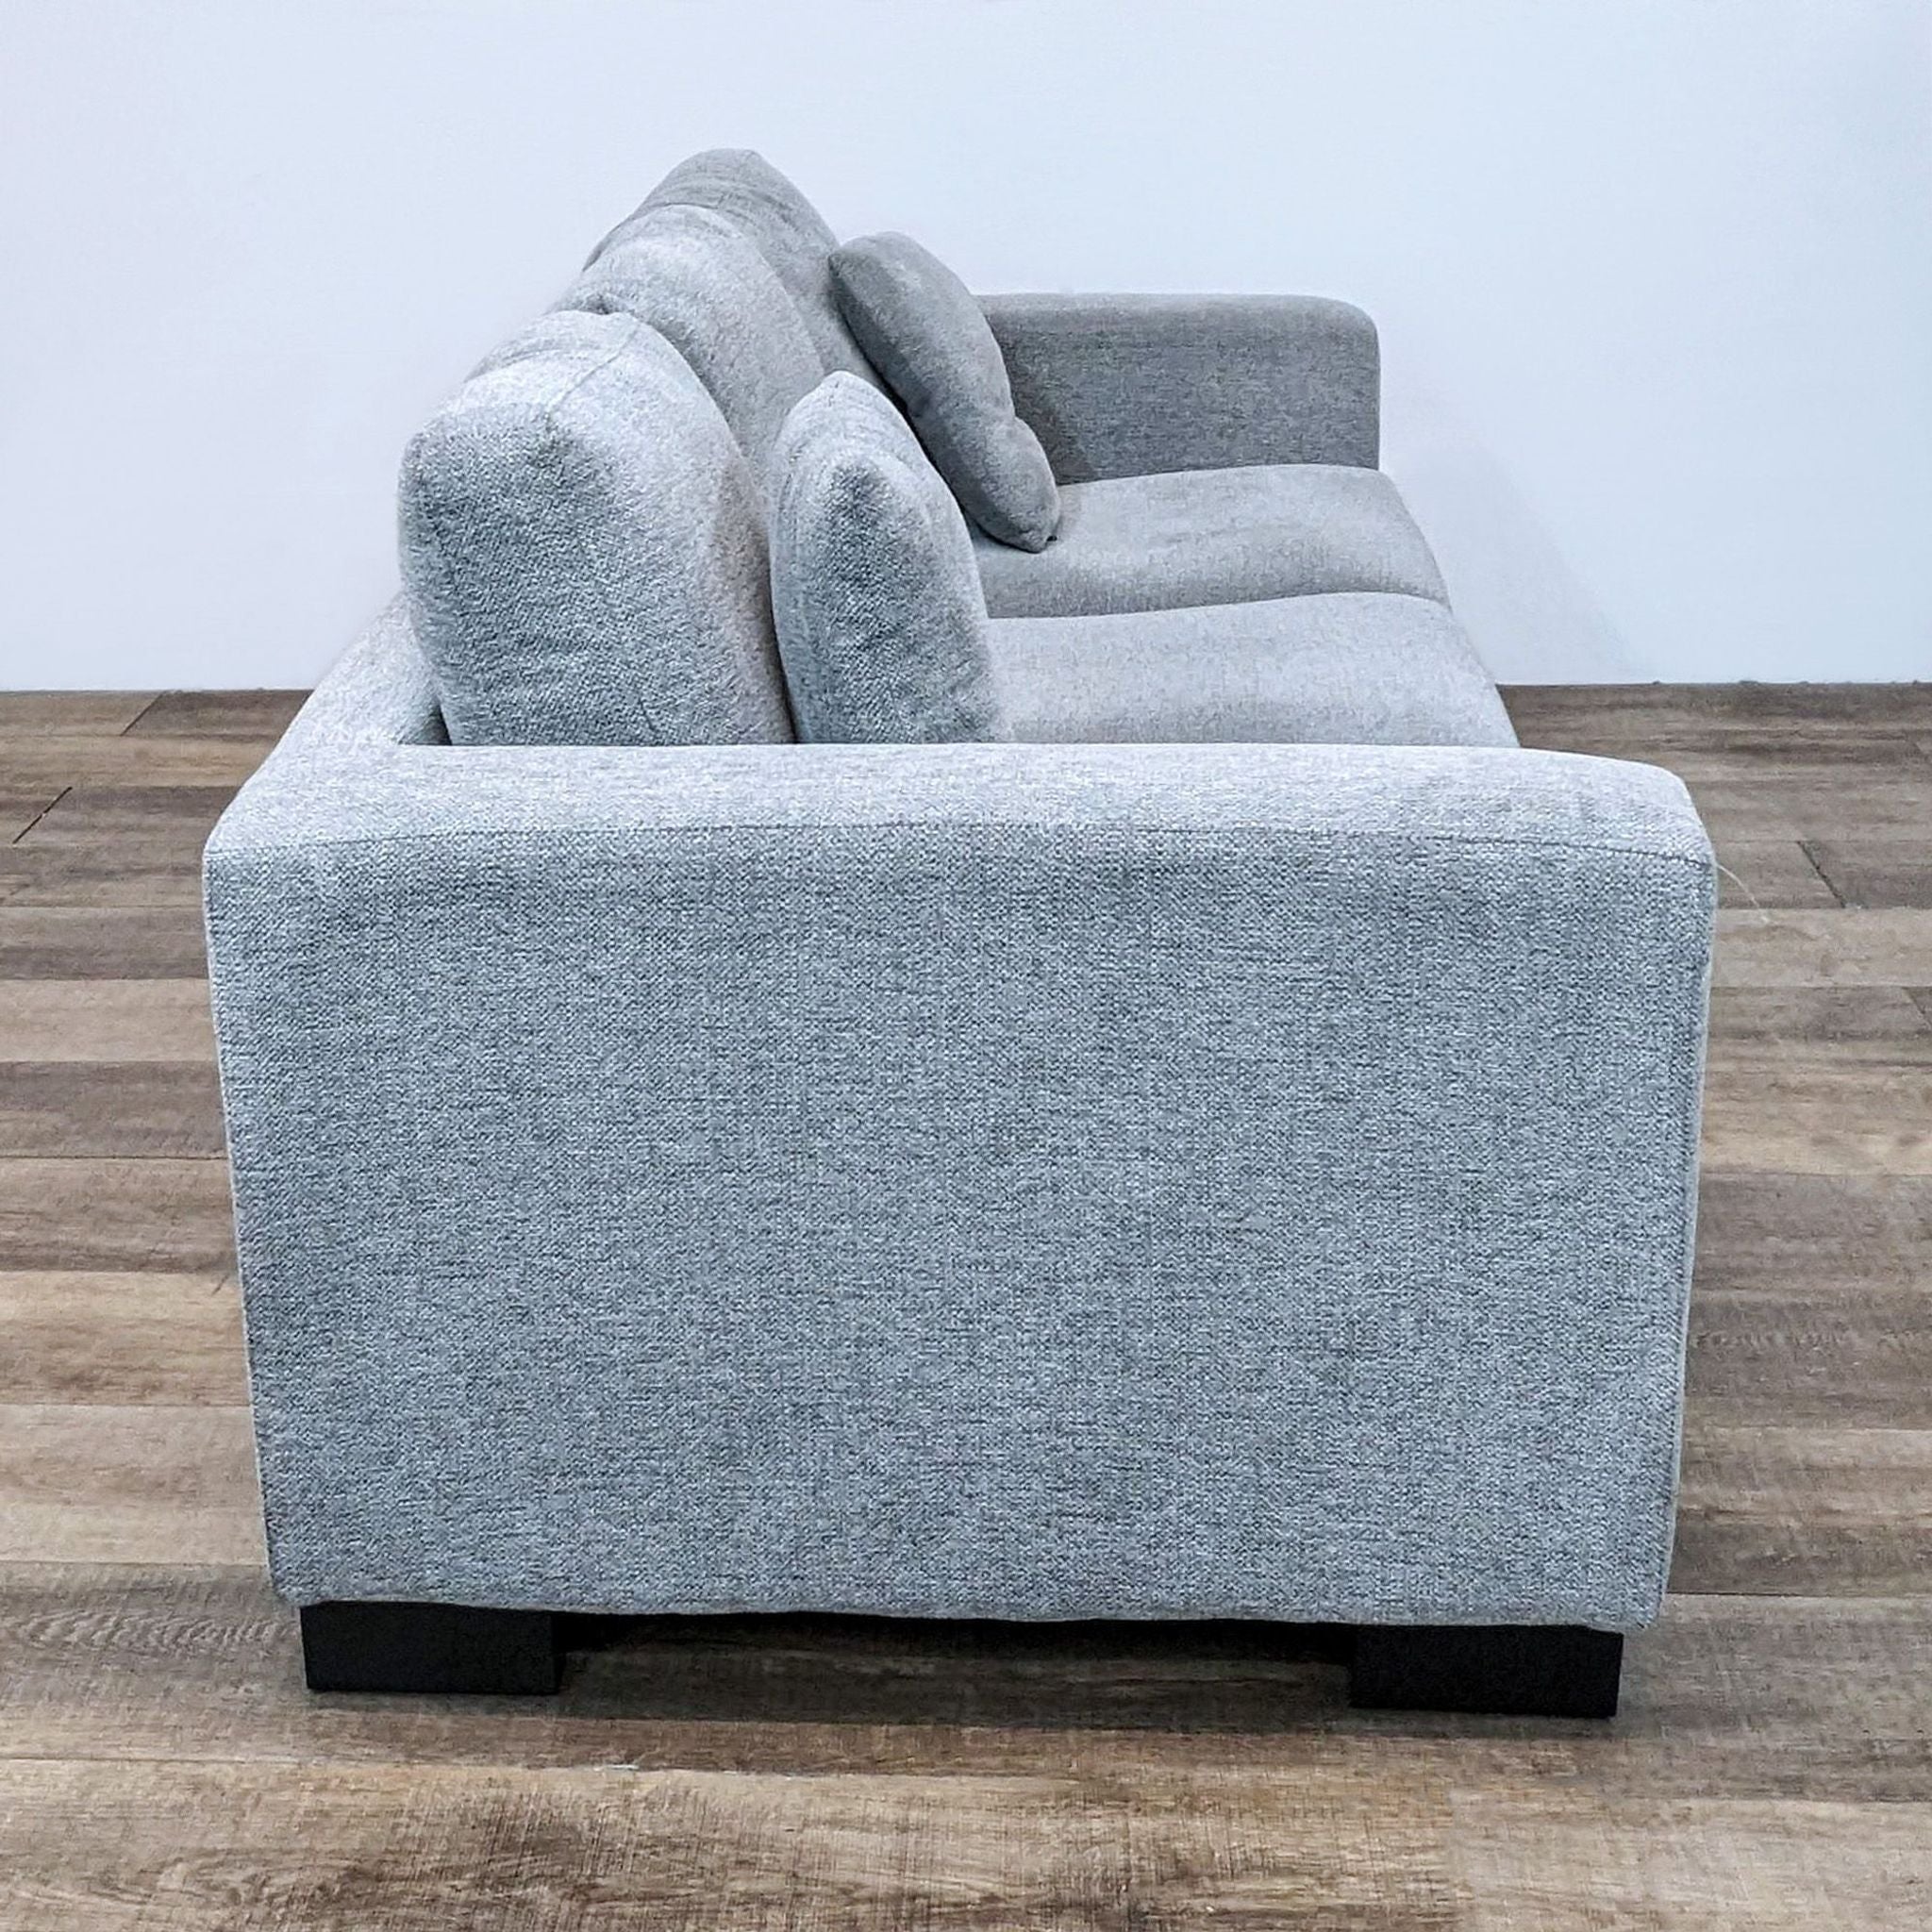 Side view of a Reperch brand 3-seat compact gray fabric sofa with plush cushions and dark wood feet.